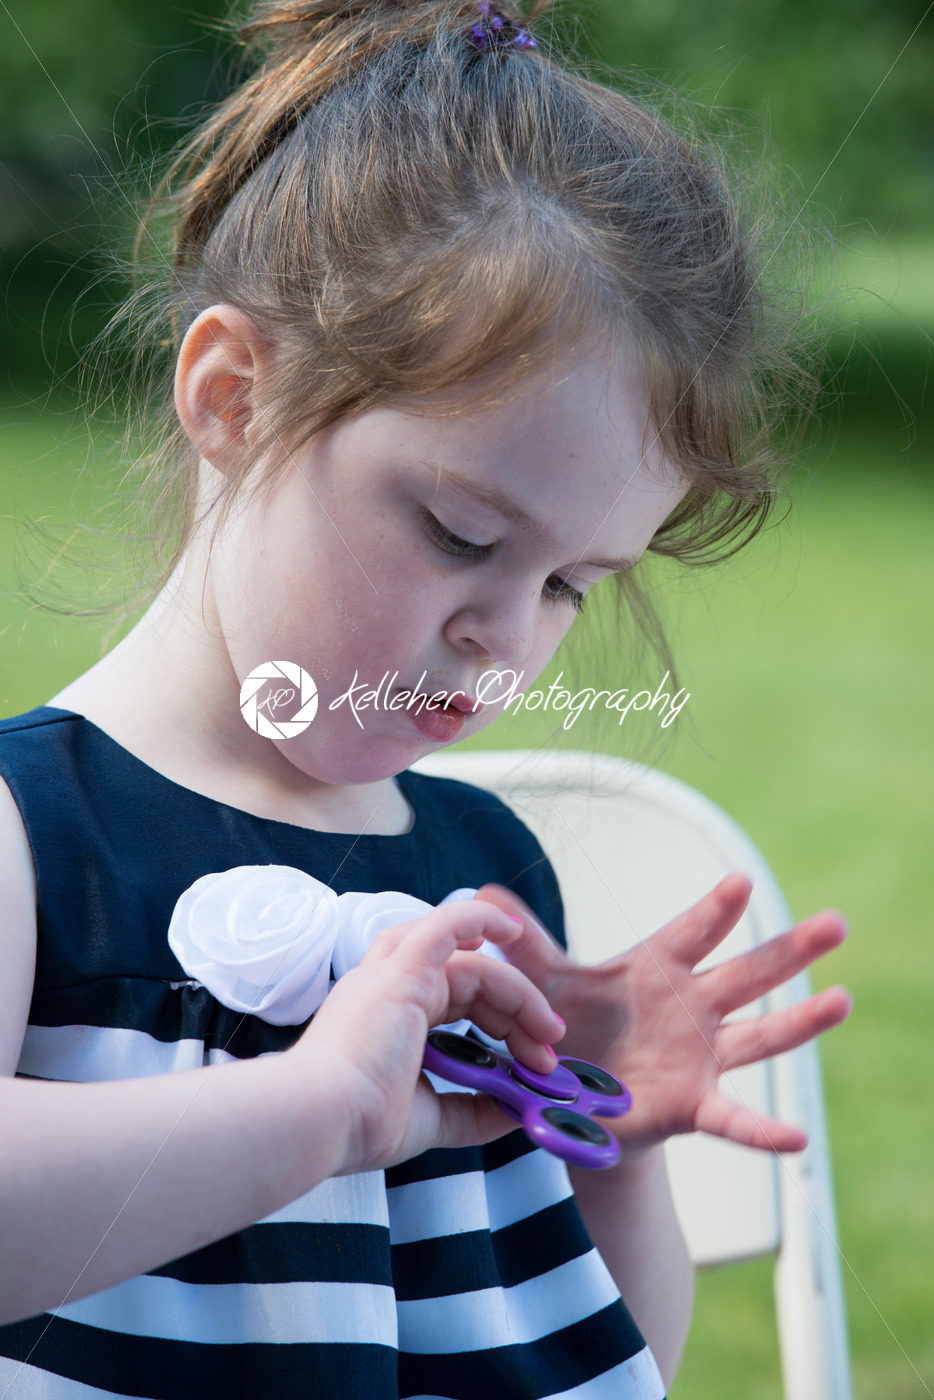 Young Girl Playing with Fidget Hand Spinner - Kelleher Photography Store